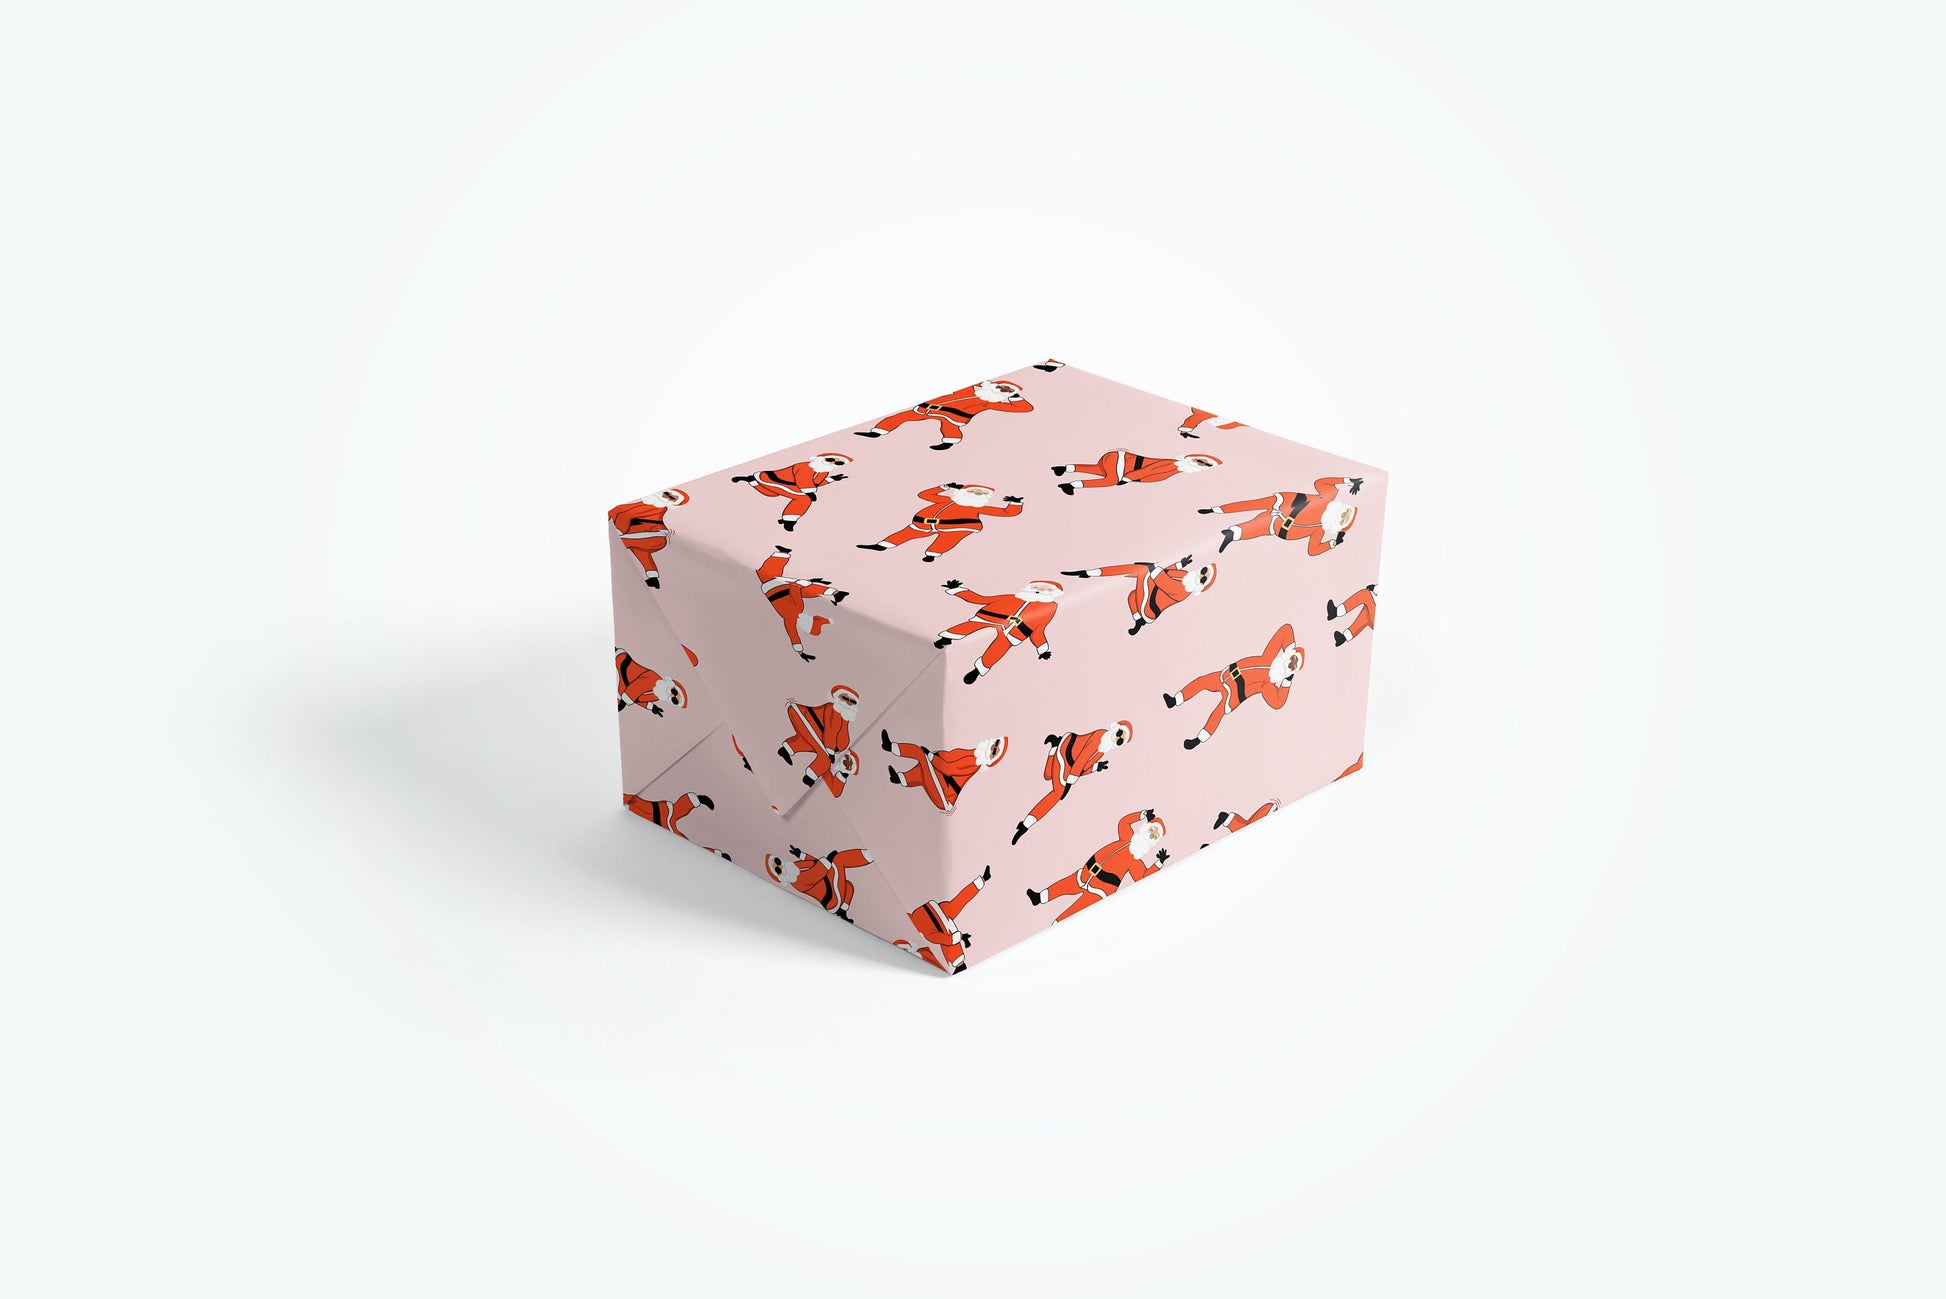 Sleighin' Santas Wrapping Paper - Christmas Gift Wrap - Aesthetic Wrapping Paper - Funny - Multi-Cultural - Holiday Gift Idea - Pink - Slay